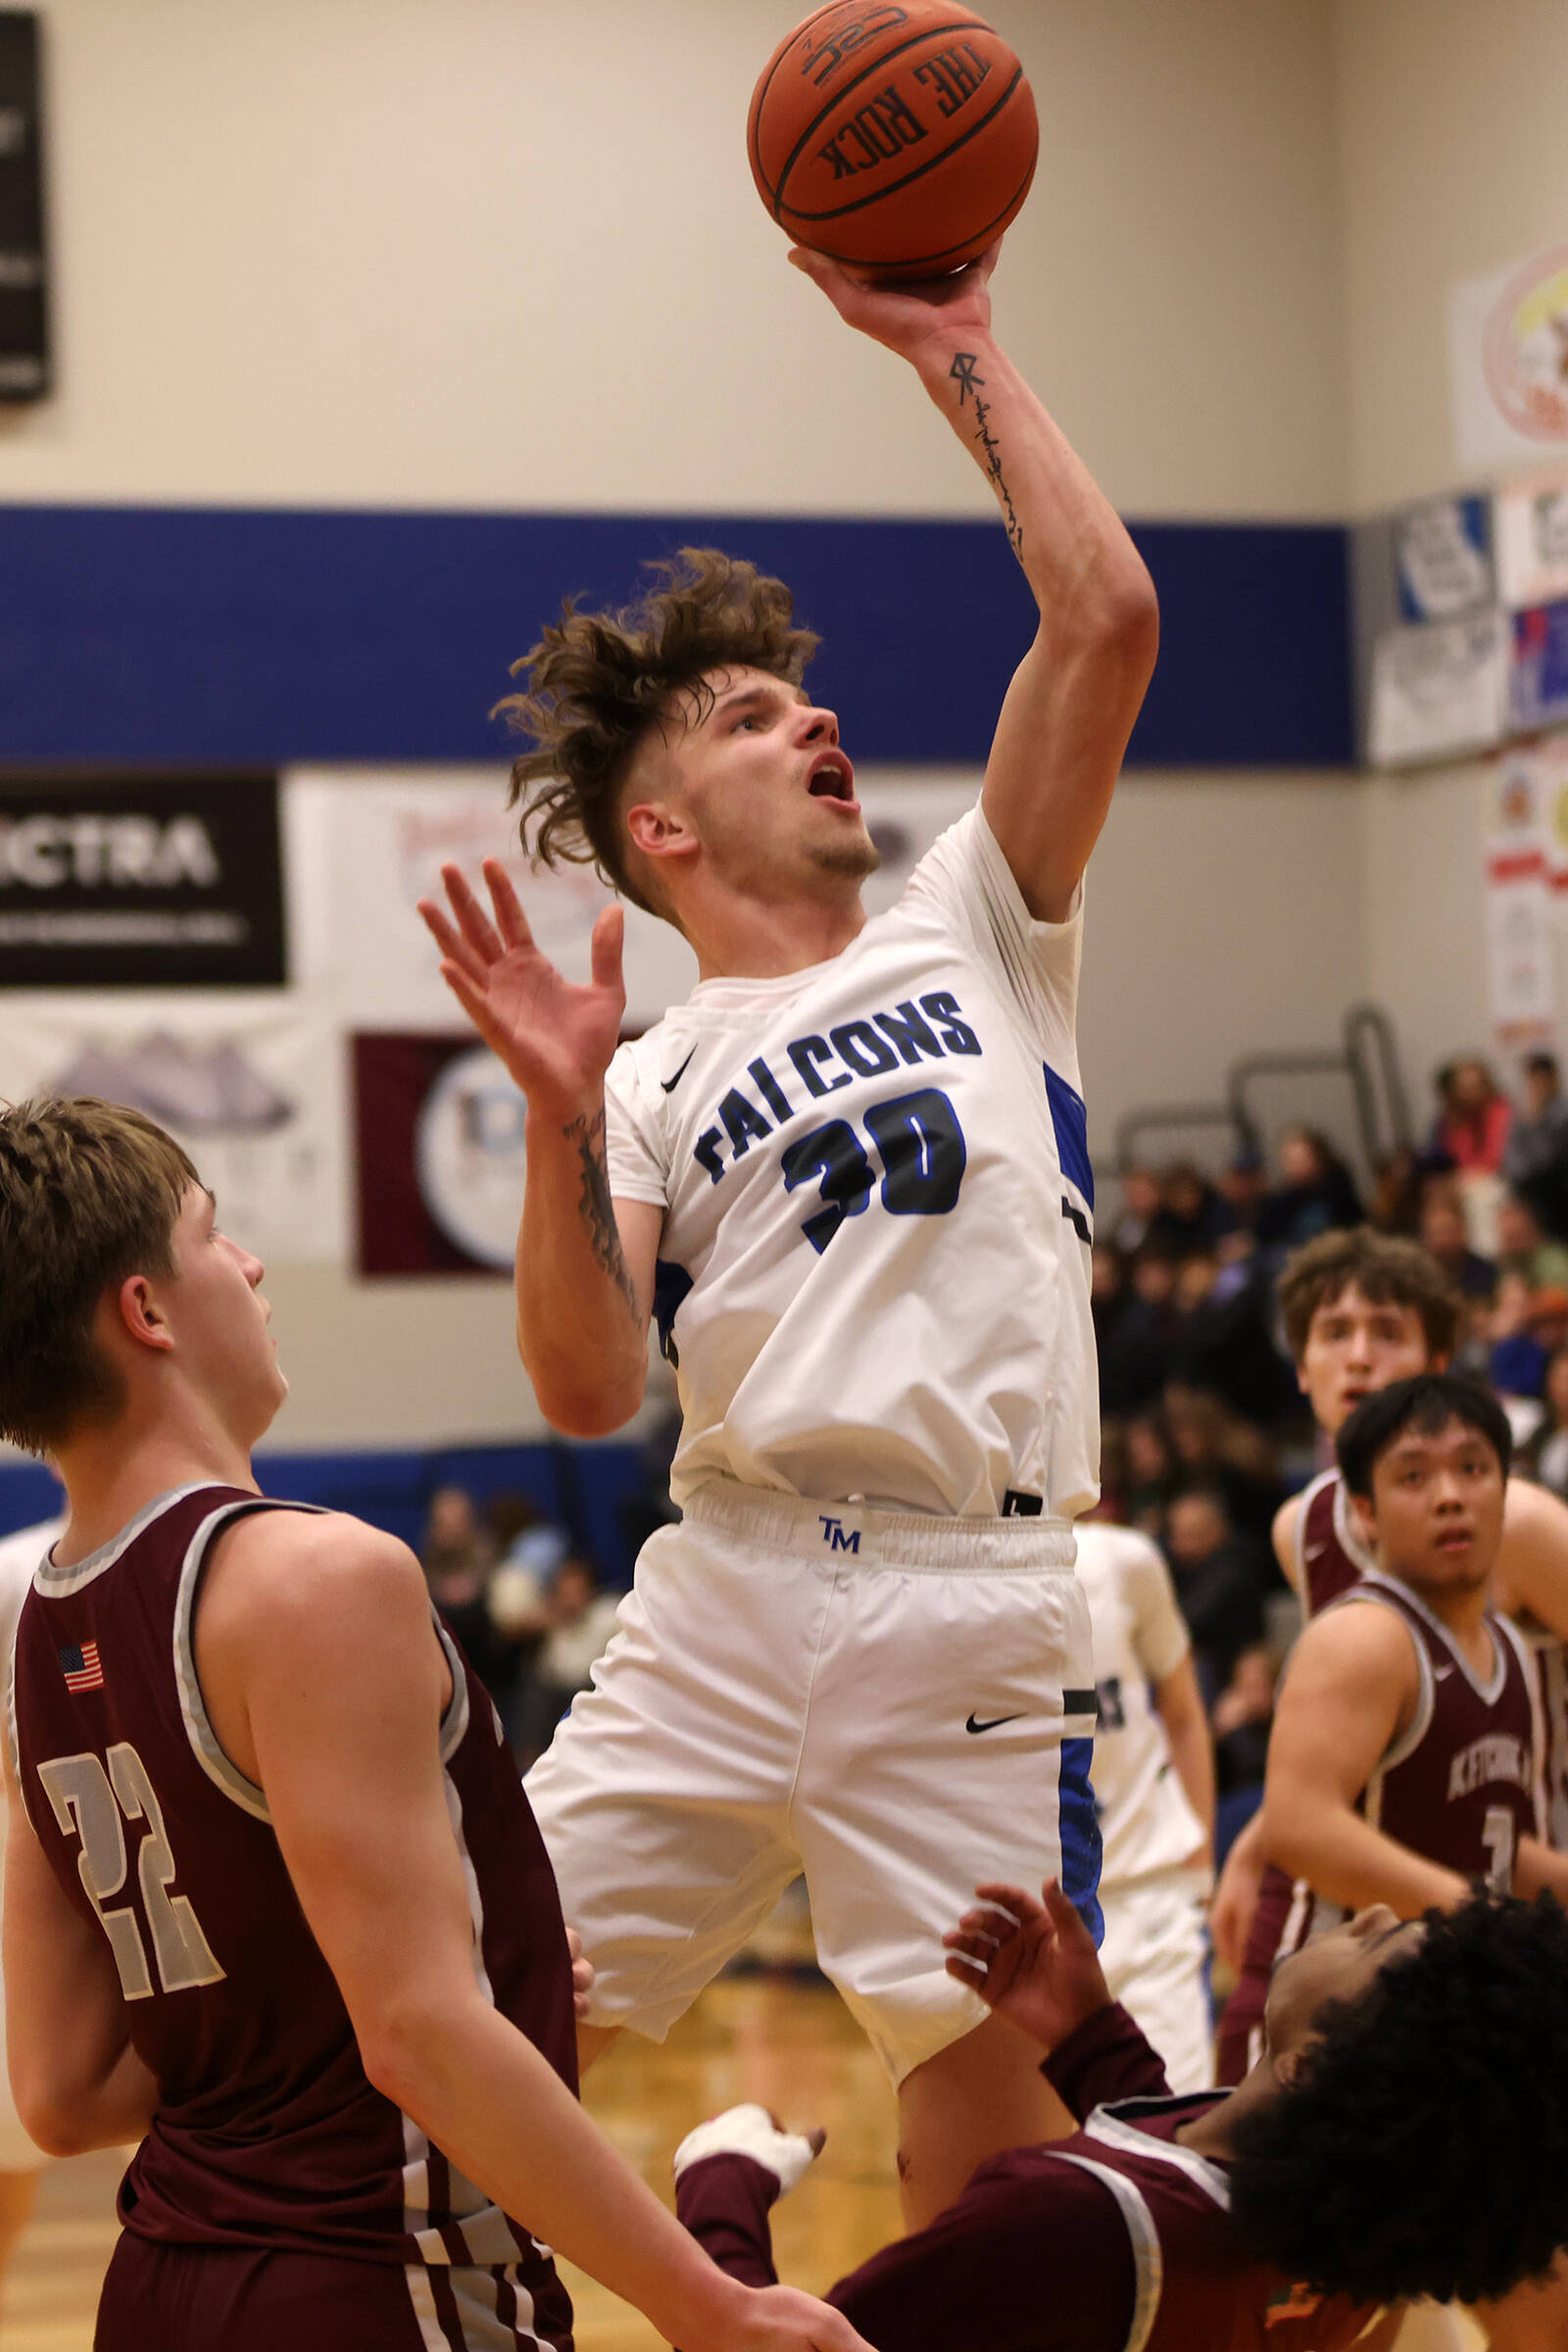 TMHS junior Thomas Baxter (30) takes a tough shot in traffic late in a Friday night 64-59 win against Ketchikan High School. Before the game, Baxter was honored for breaking the 1,000-point mark. He’s the fastest-ever Falcon to do so, and is now third on the school’s all-time scoring list. He finished Friday’s game with 25 points. (Ben Hohenstatt / Juneau Empire)